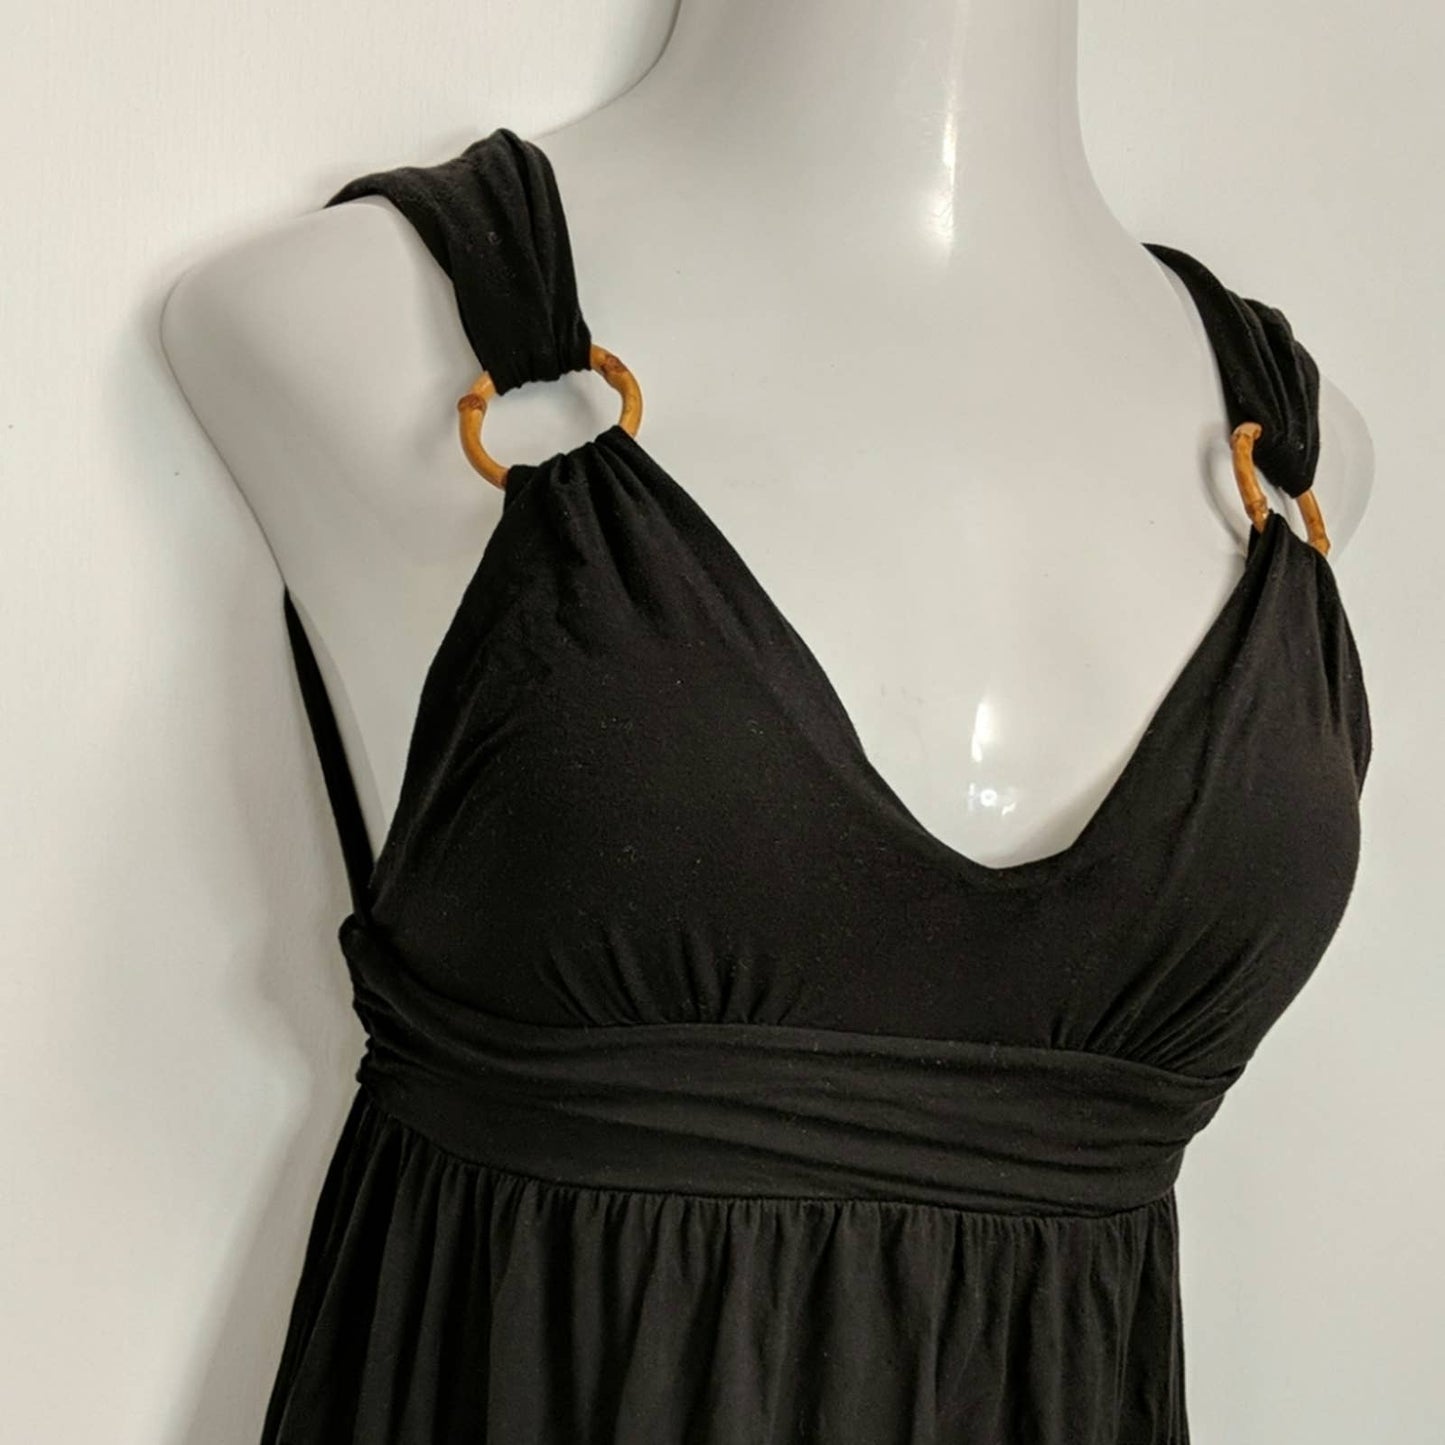 VICTORIA'S SECRET Black Plunge Sundress with Gold Rings Small